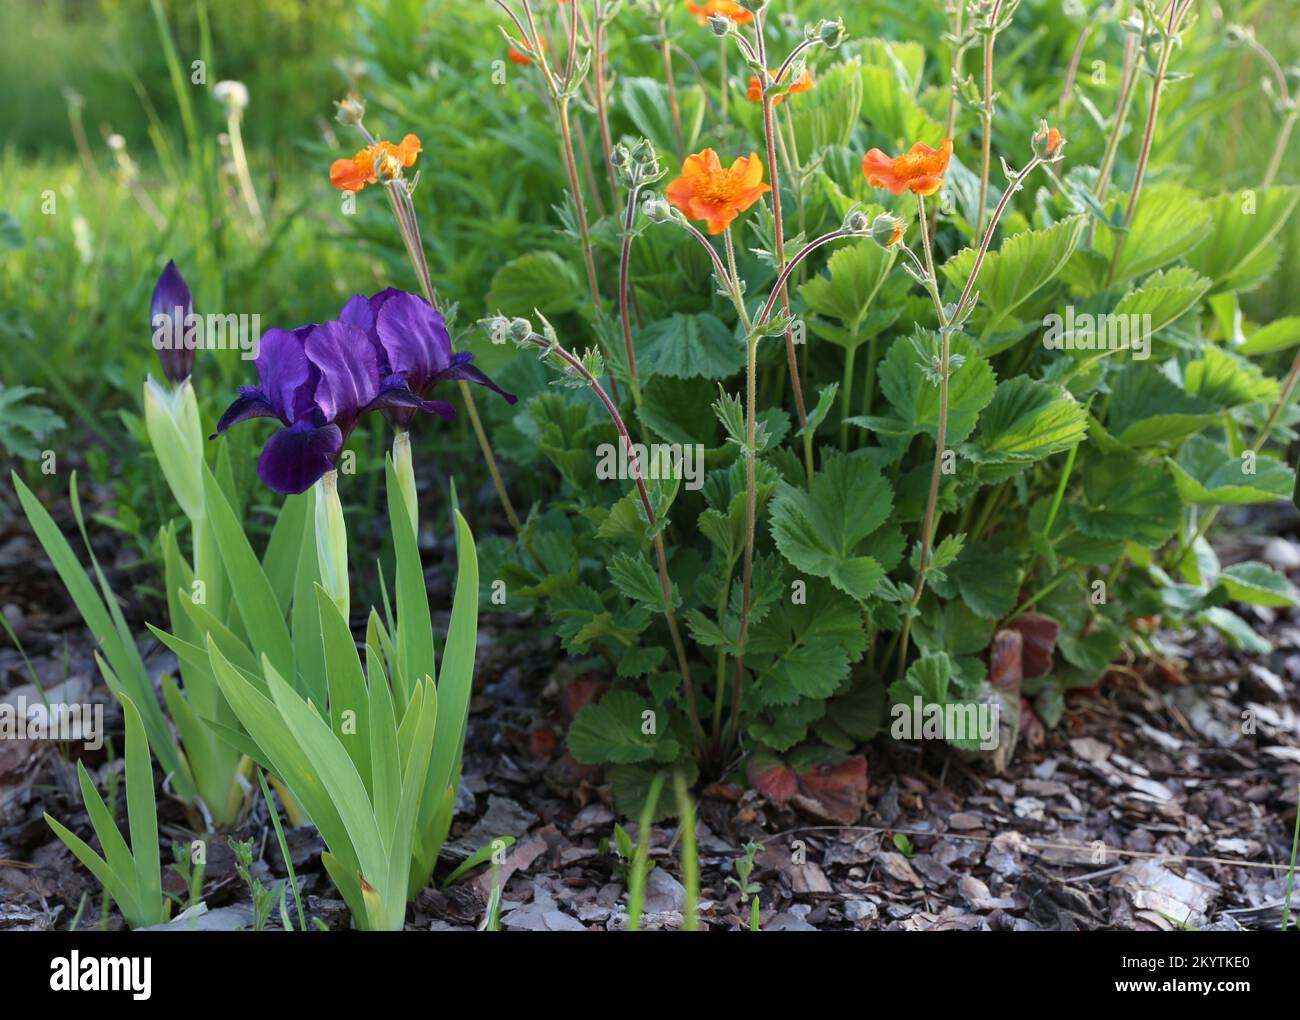 Spring flower bed with blooming flowers, purple iris and orange Chilean Avens Stock Photo